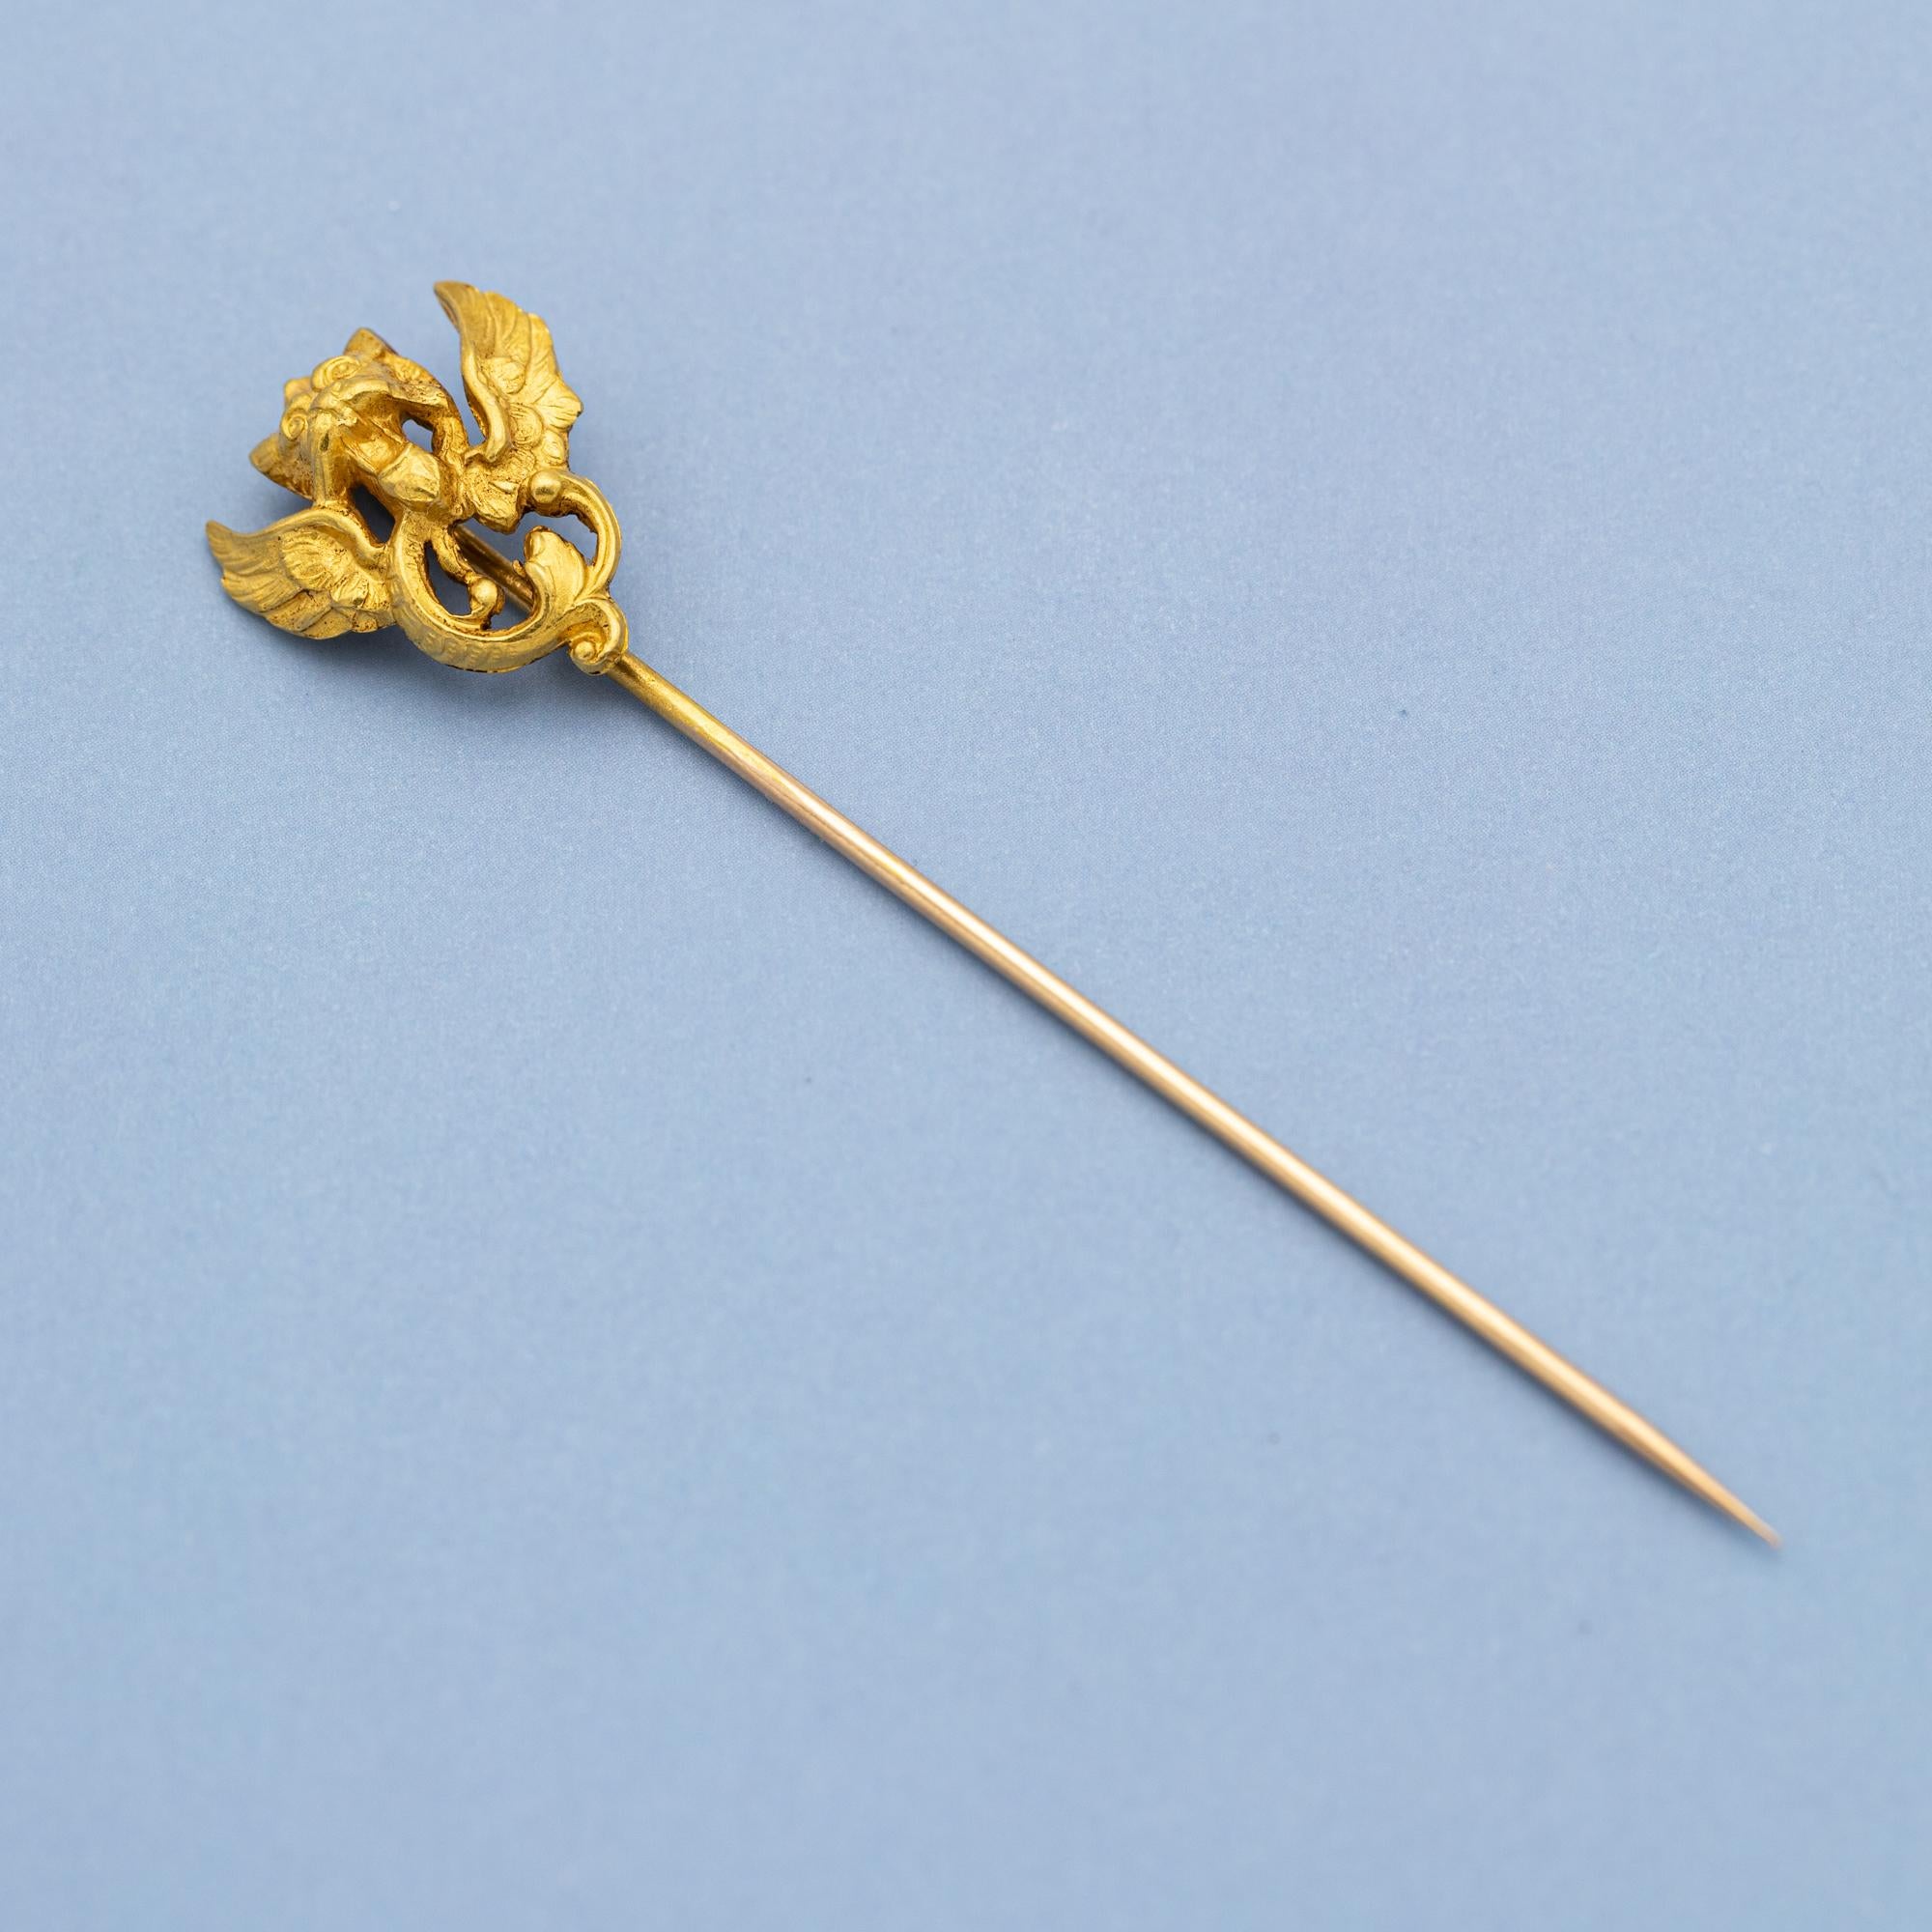 Victorian 18k Yellow gold stick pin - Griffin brooch - Antique French Dragon cravat pin For Sale